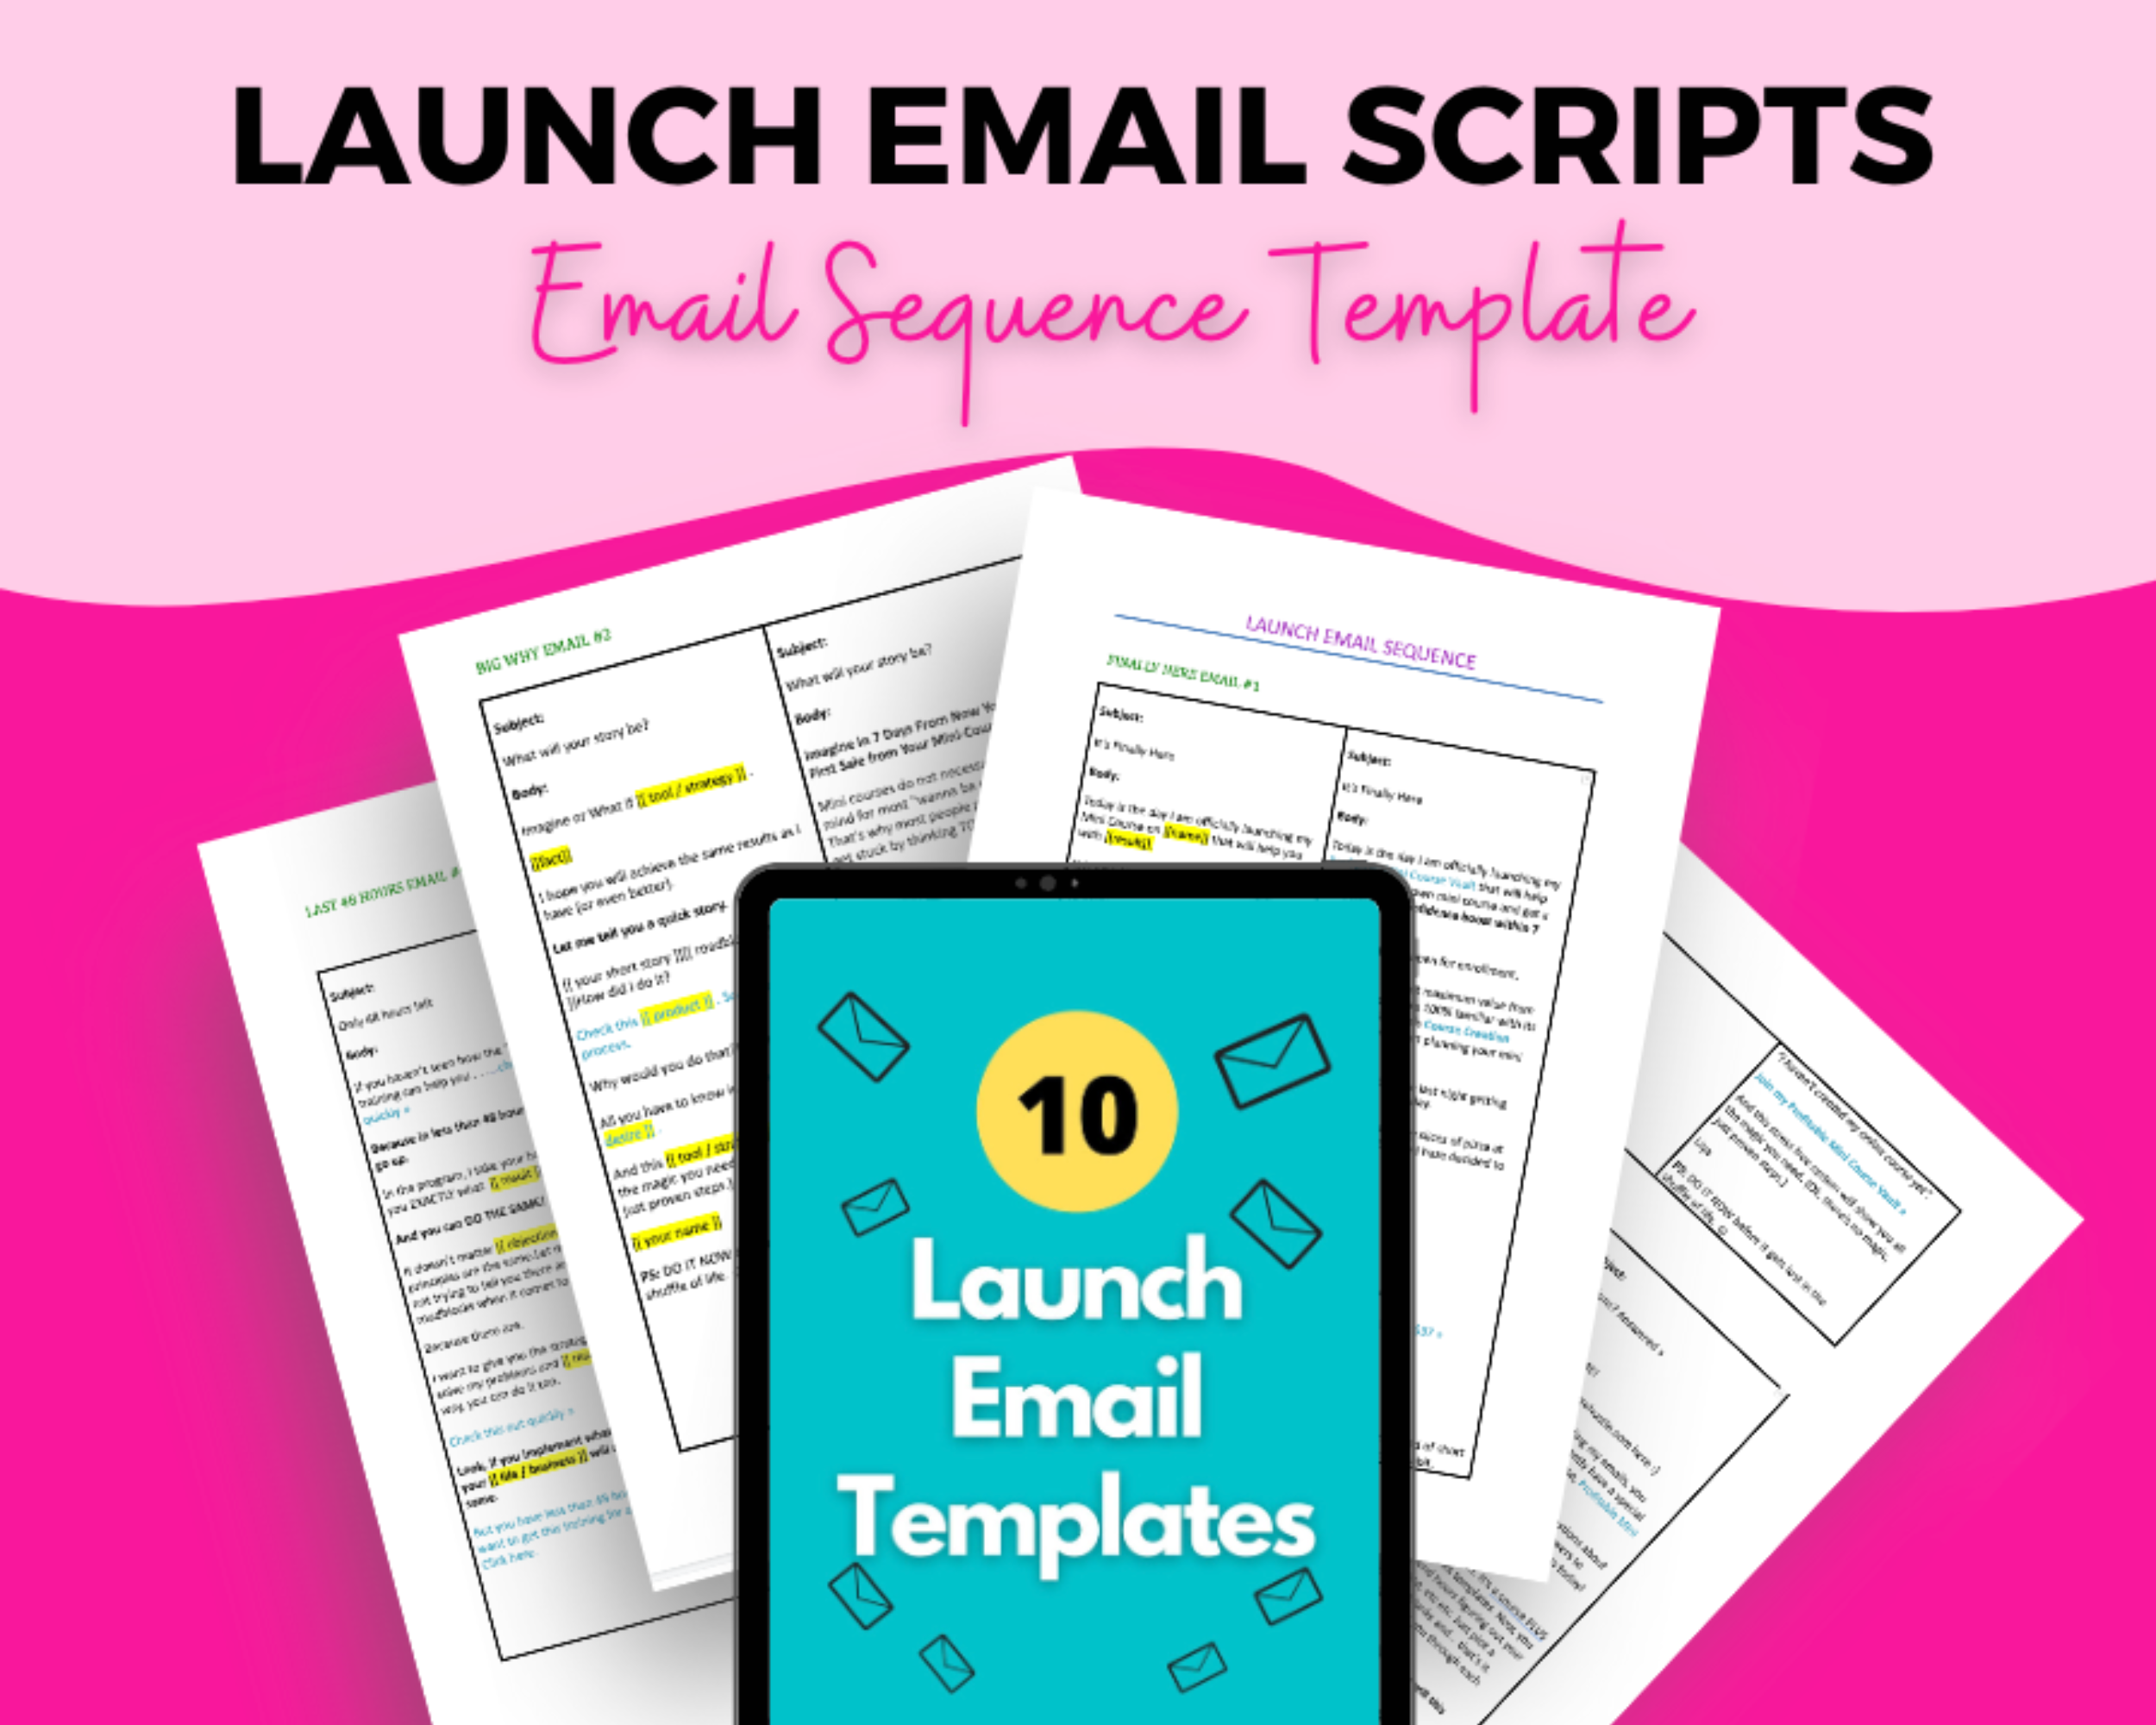 Launch Email Templates